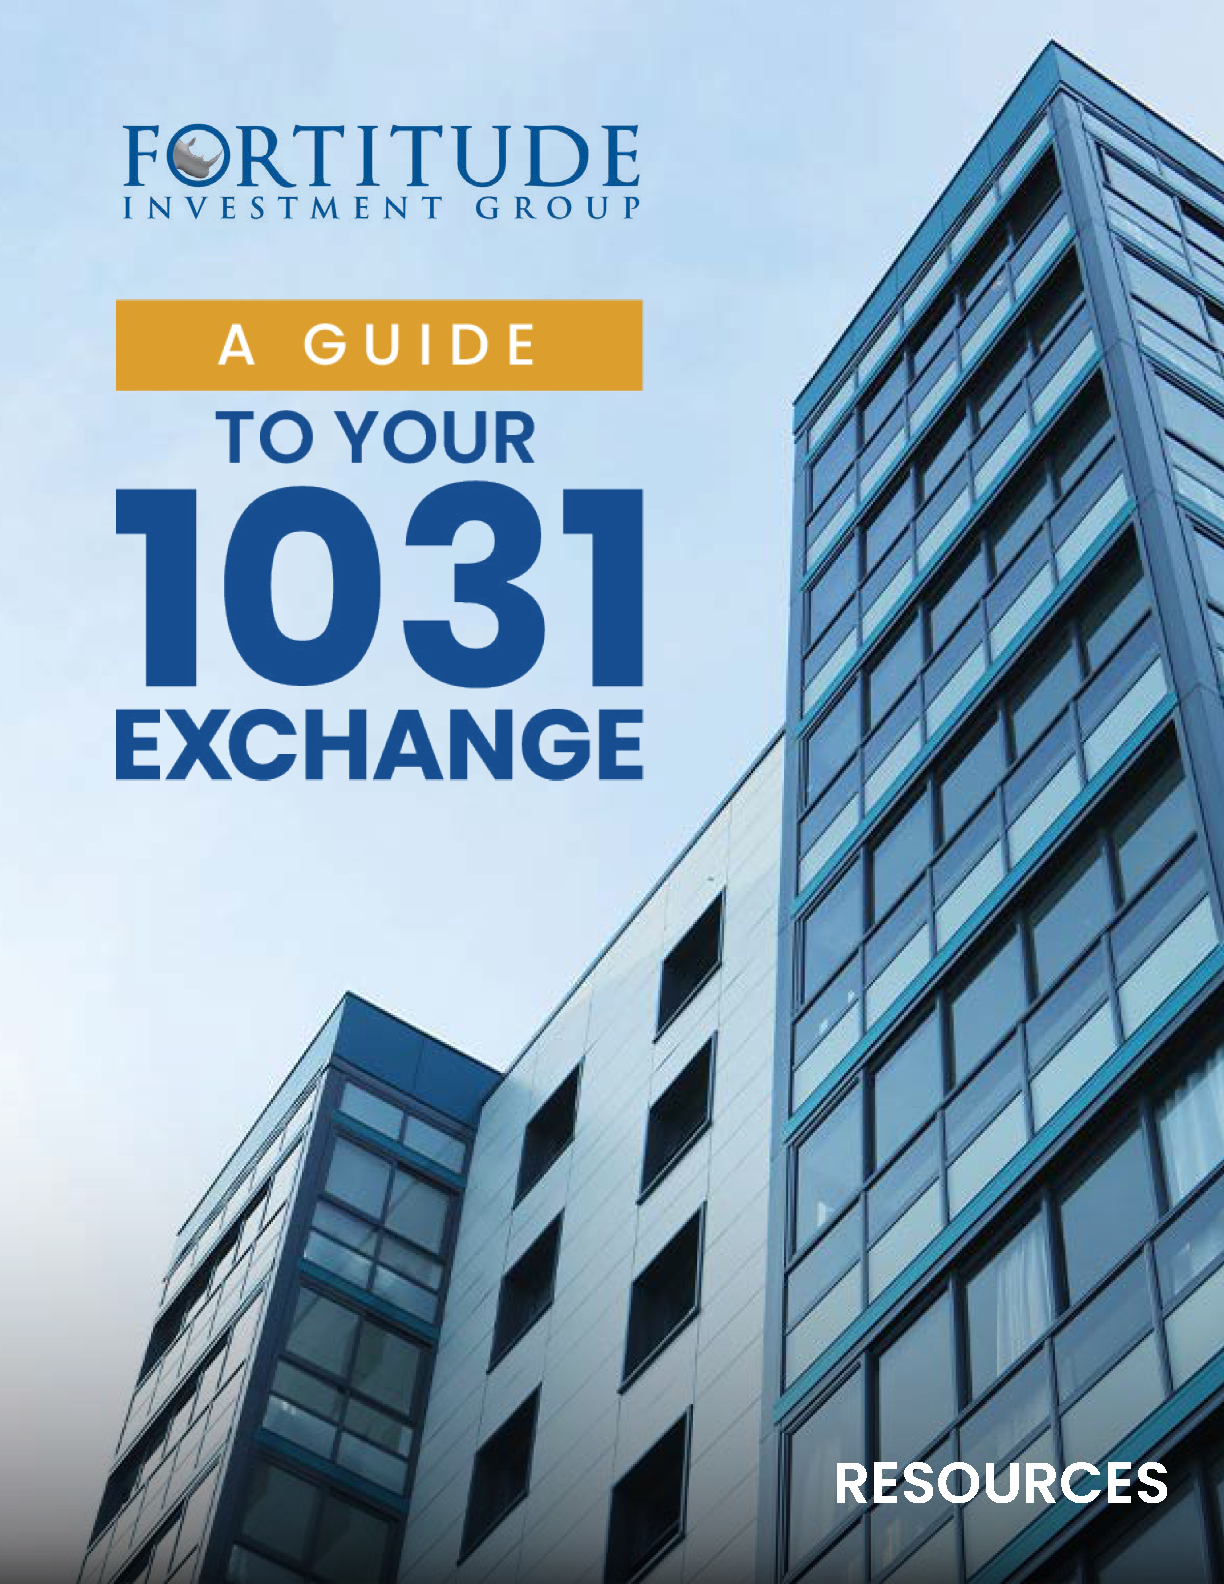 1031 Exchange Guidebook Cover